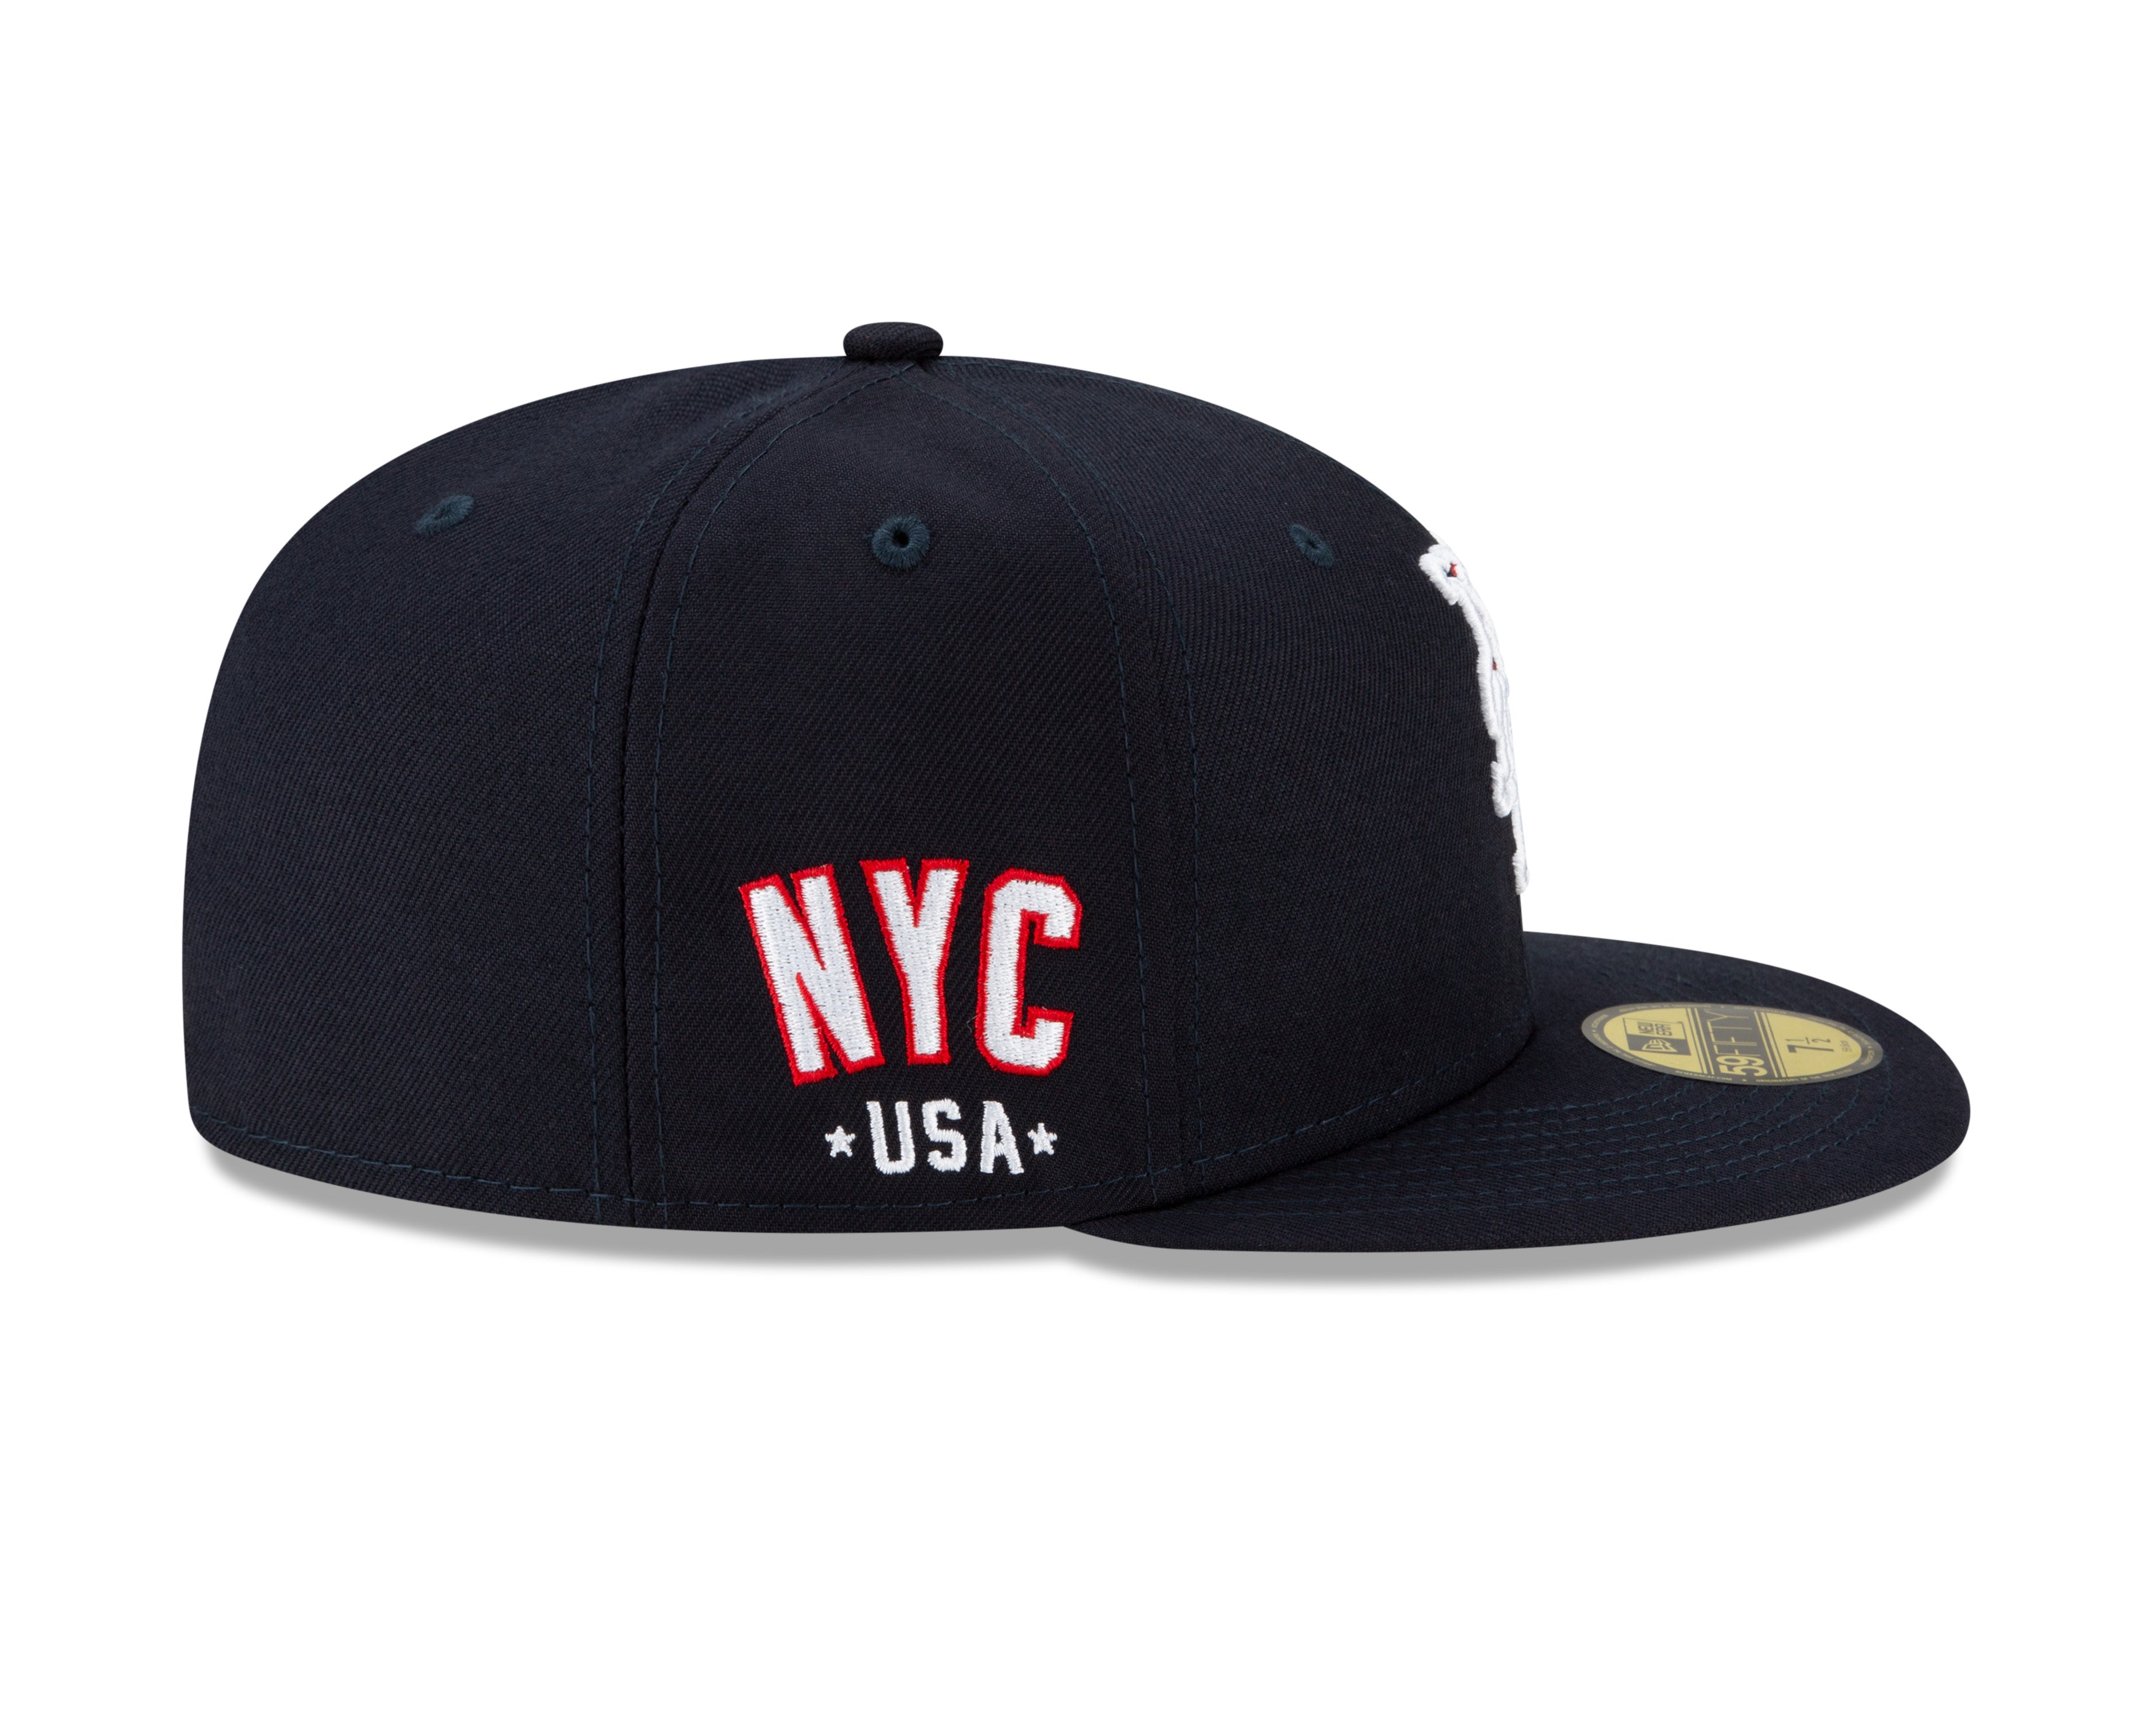 59Fifty Fitted Cap July 4 New York Mets - Navy - Headz Up 